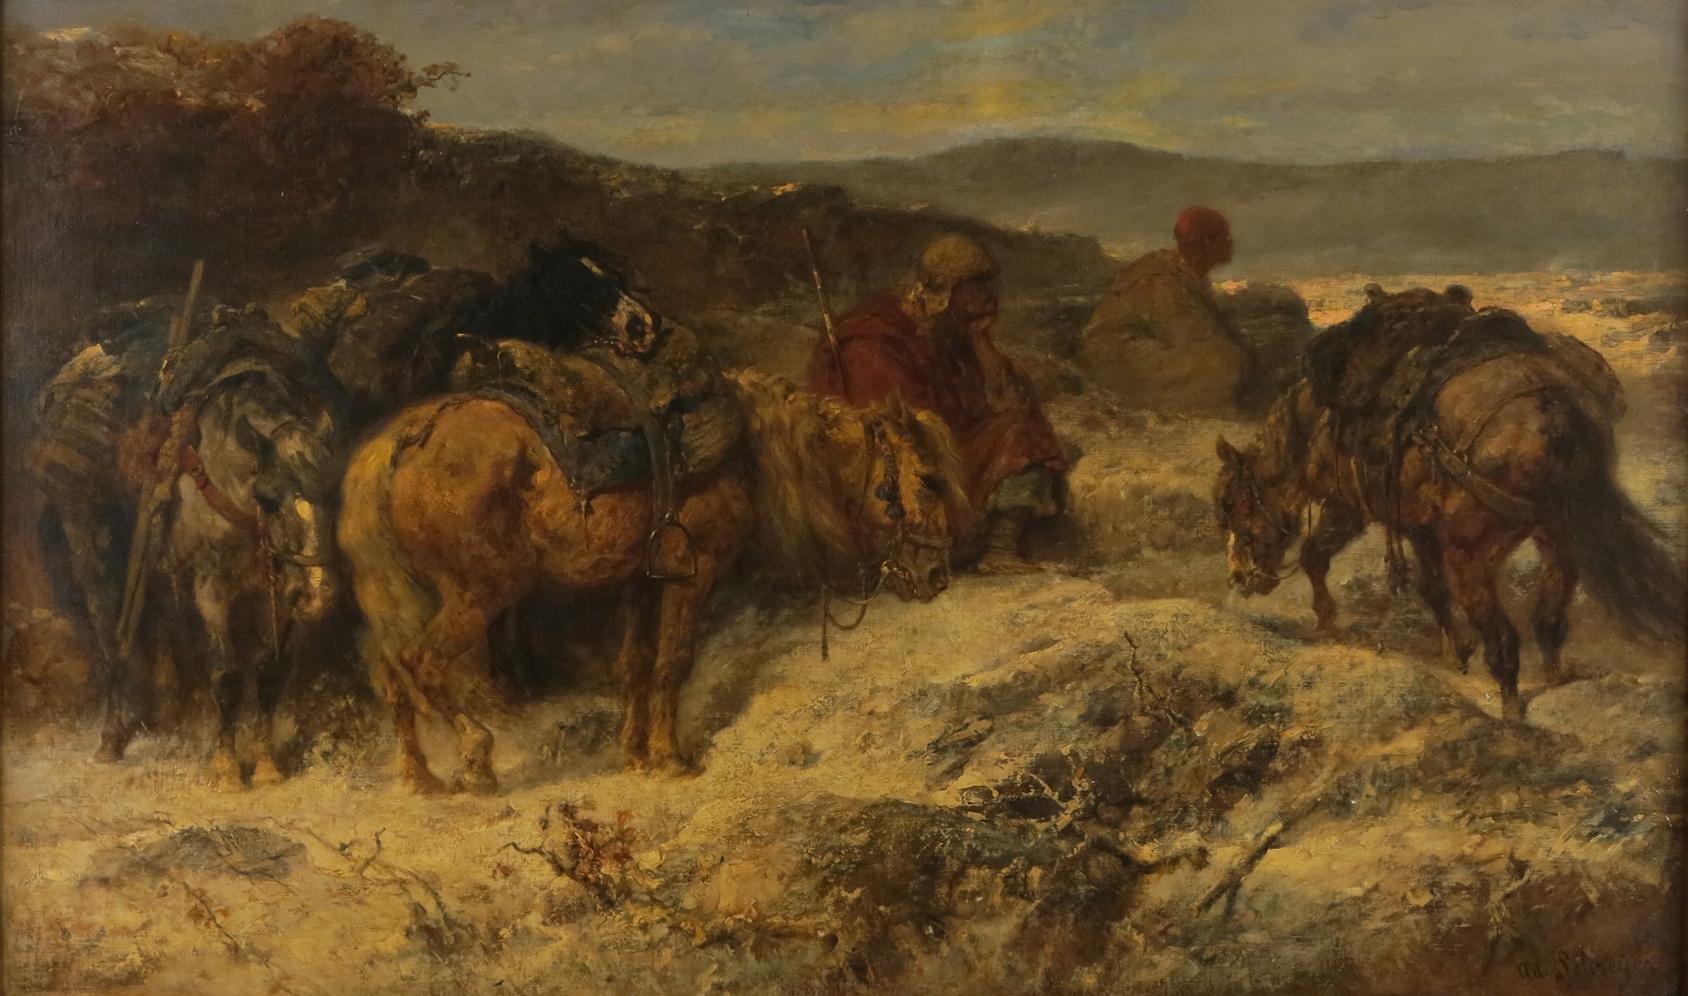 Adolf Schreyer Landscape Painting - "Arab Scouts, " Adolph Schreyer, Middle Eastern Orientalist Scene with Horses